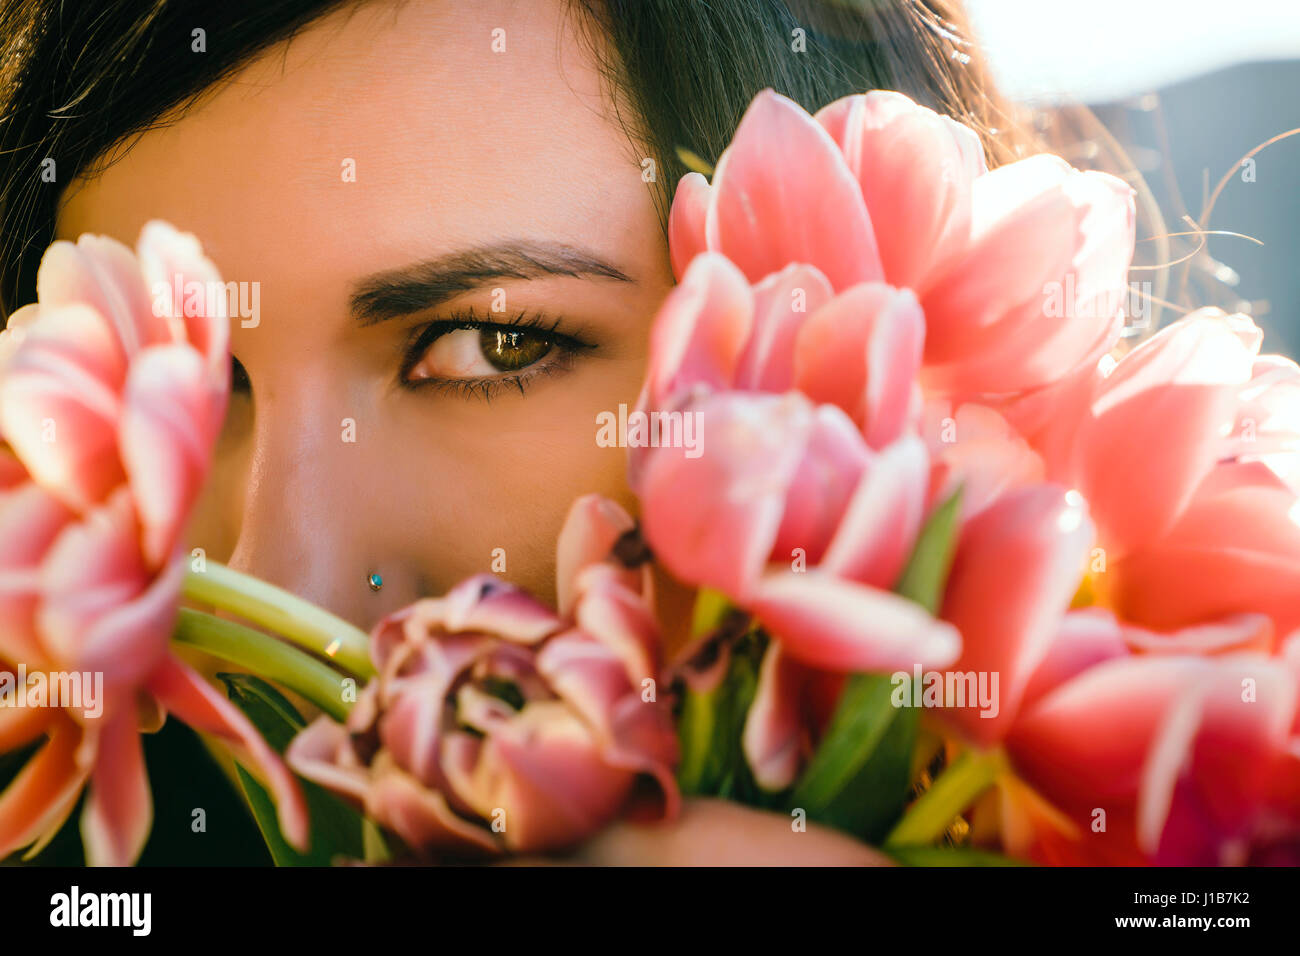 Mixed Race woman hiding face behind flowers Stock Photo